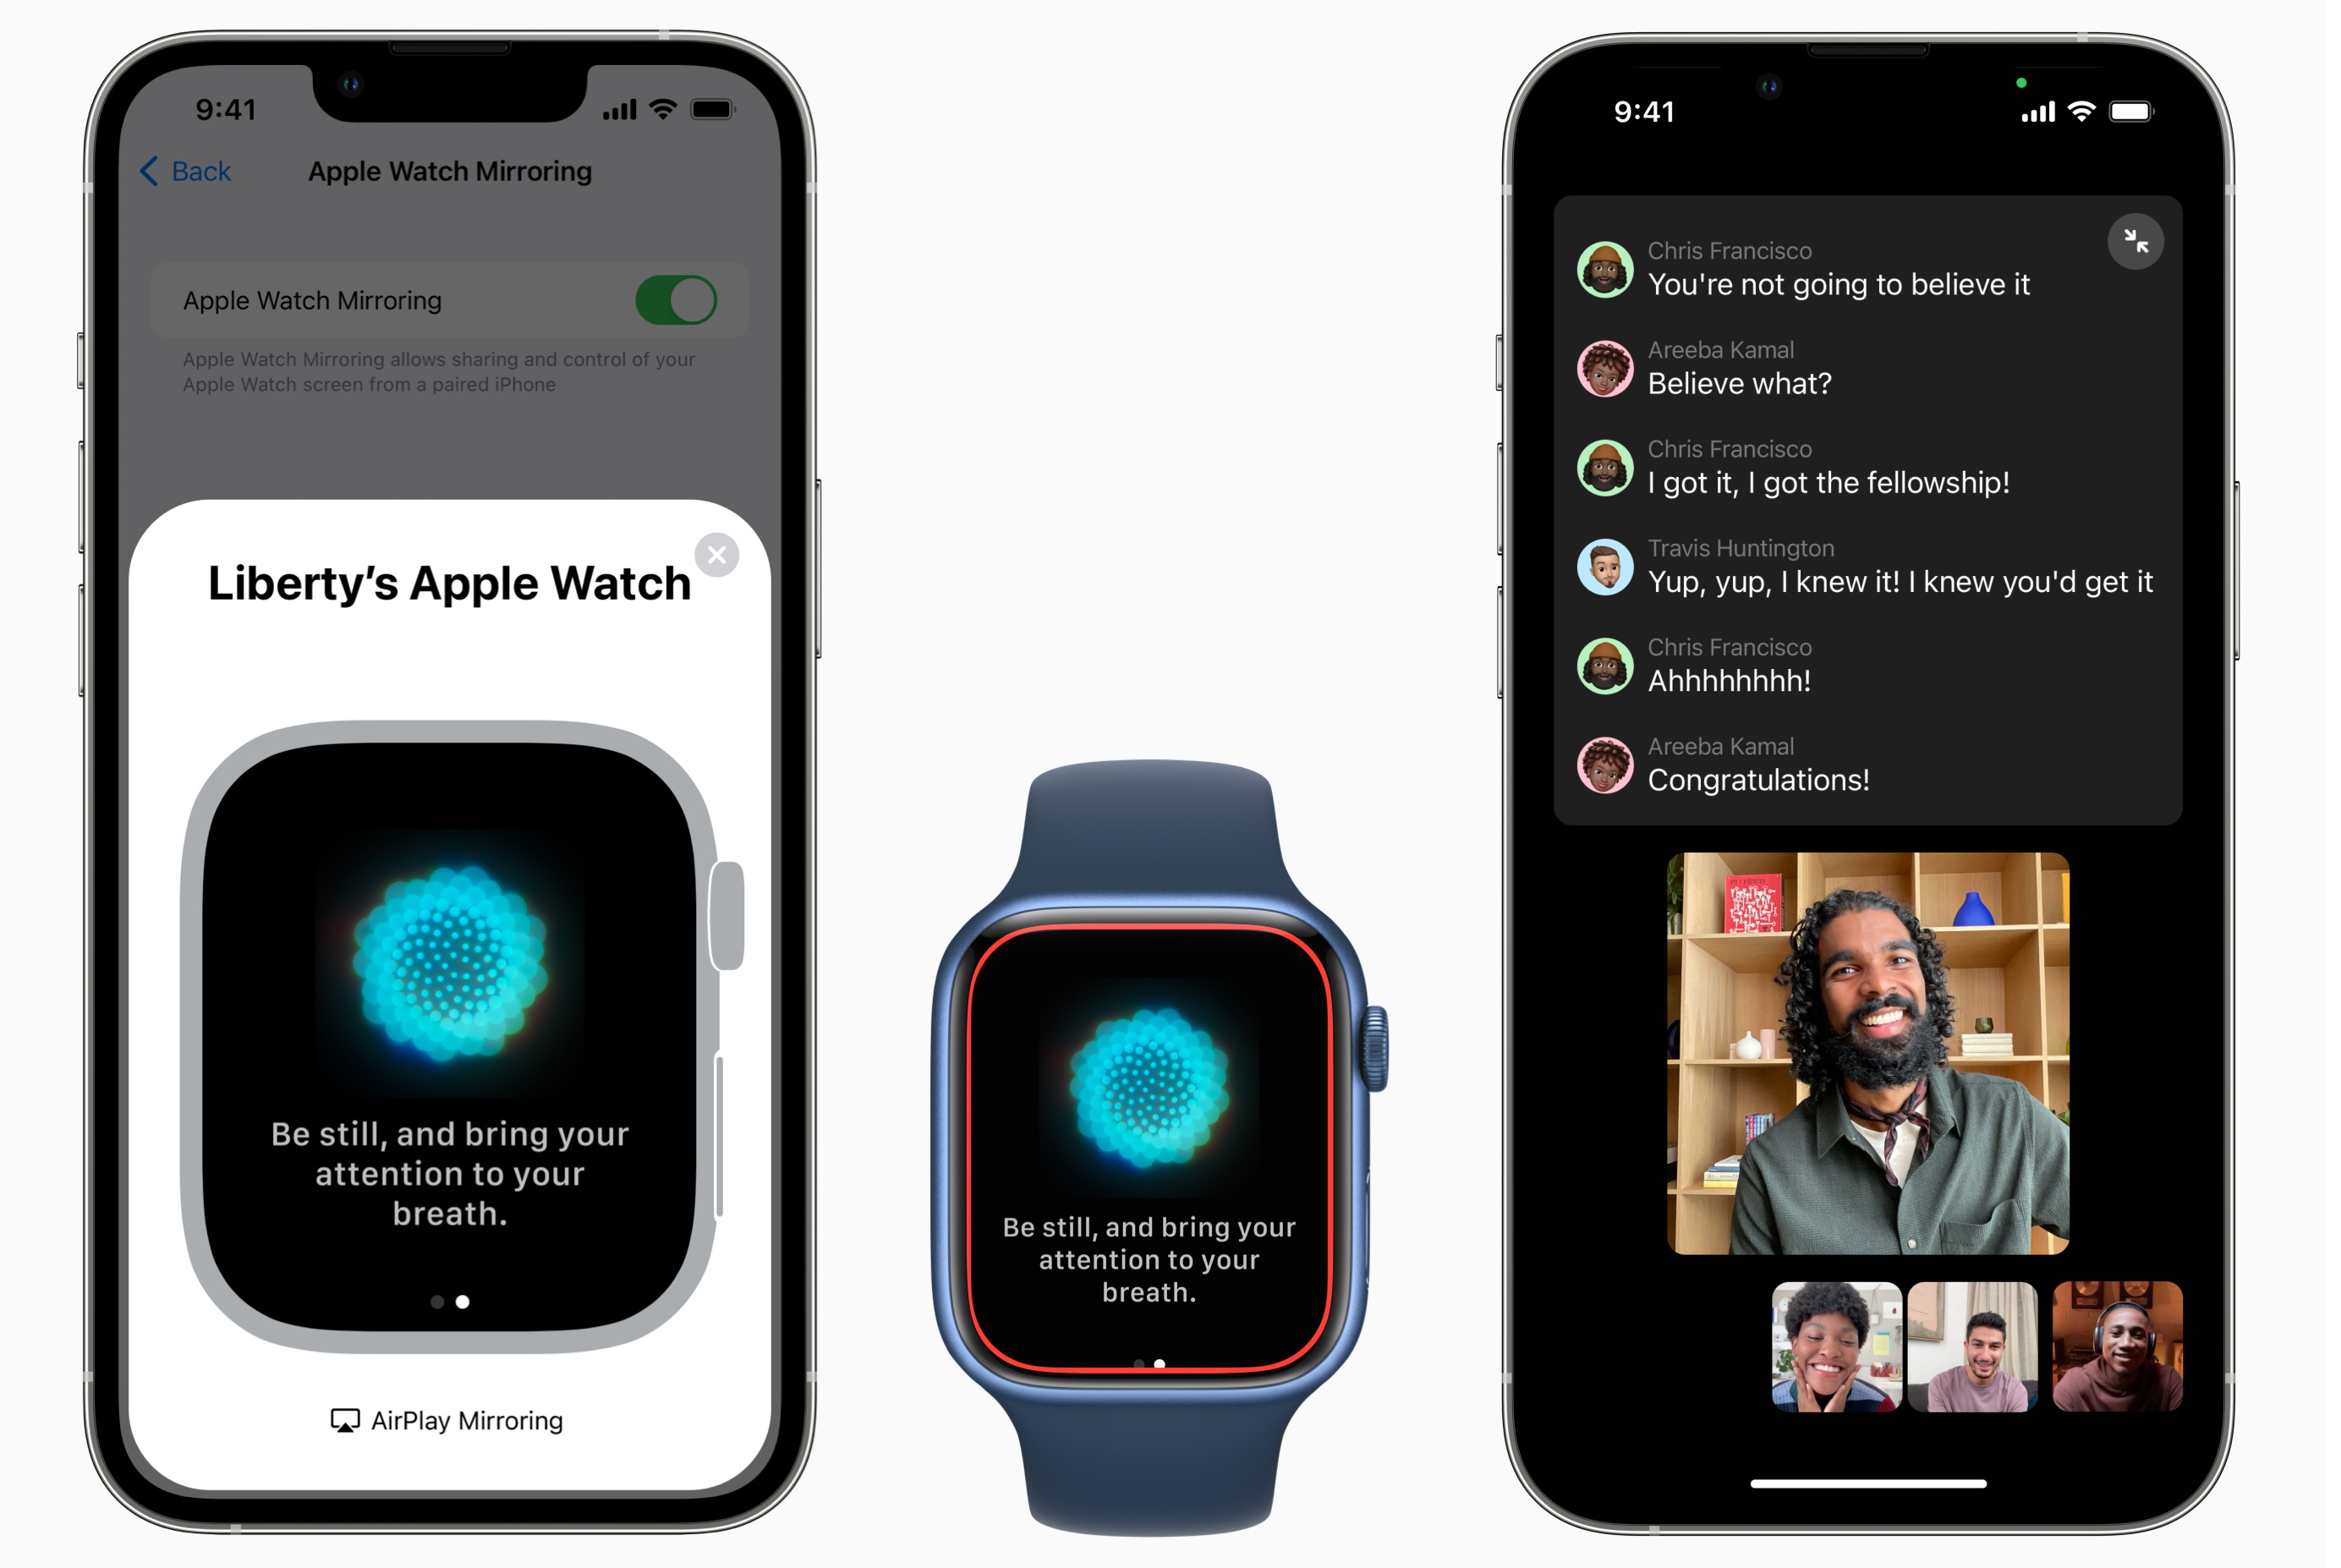 Screenshots showing Apple watch apps on an iPhone and a multi-person video call transcription.